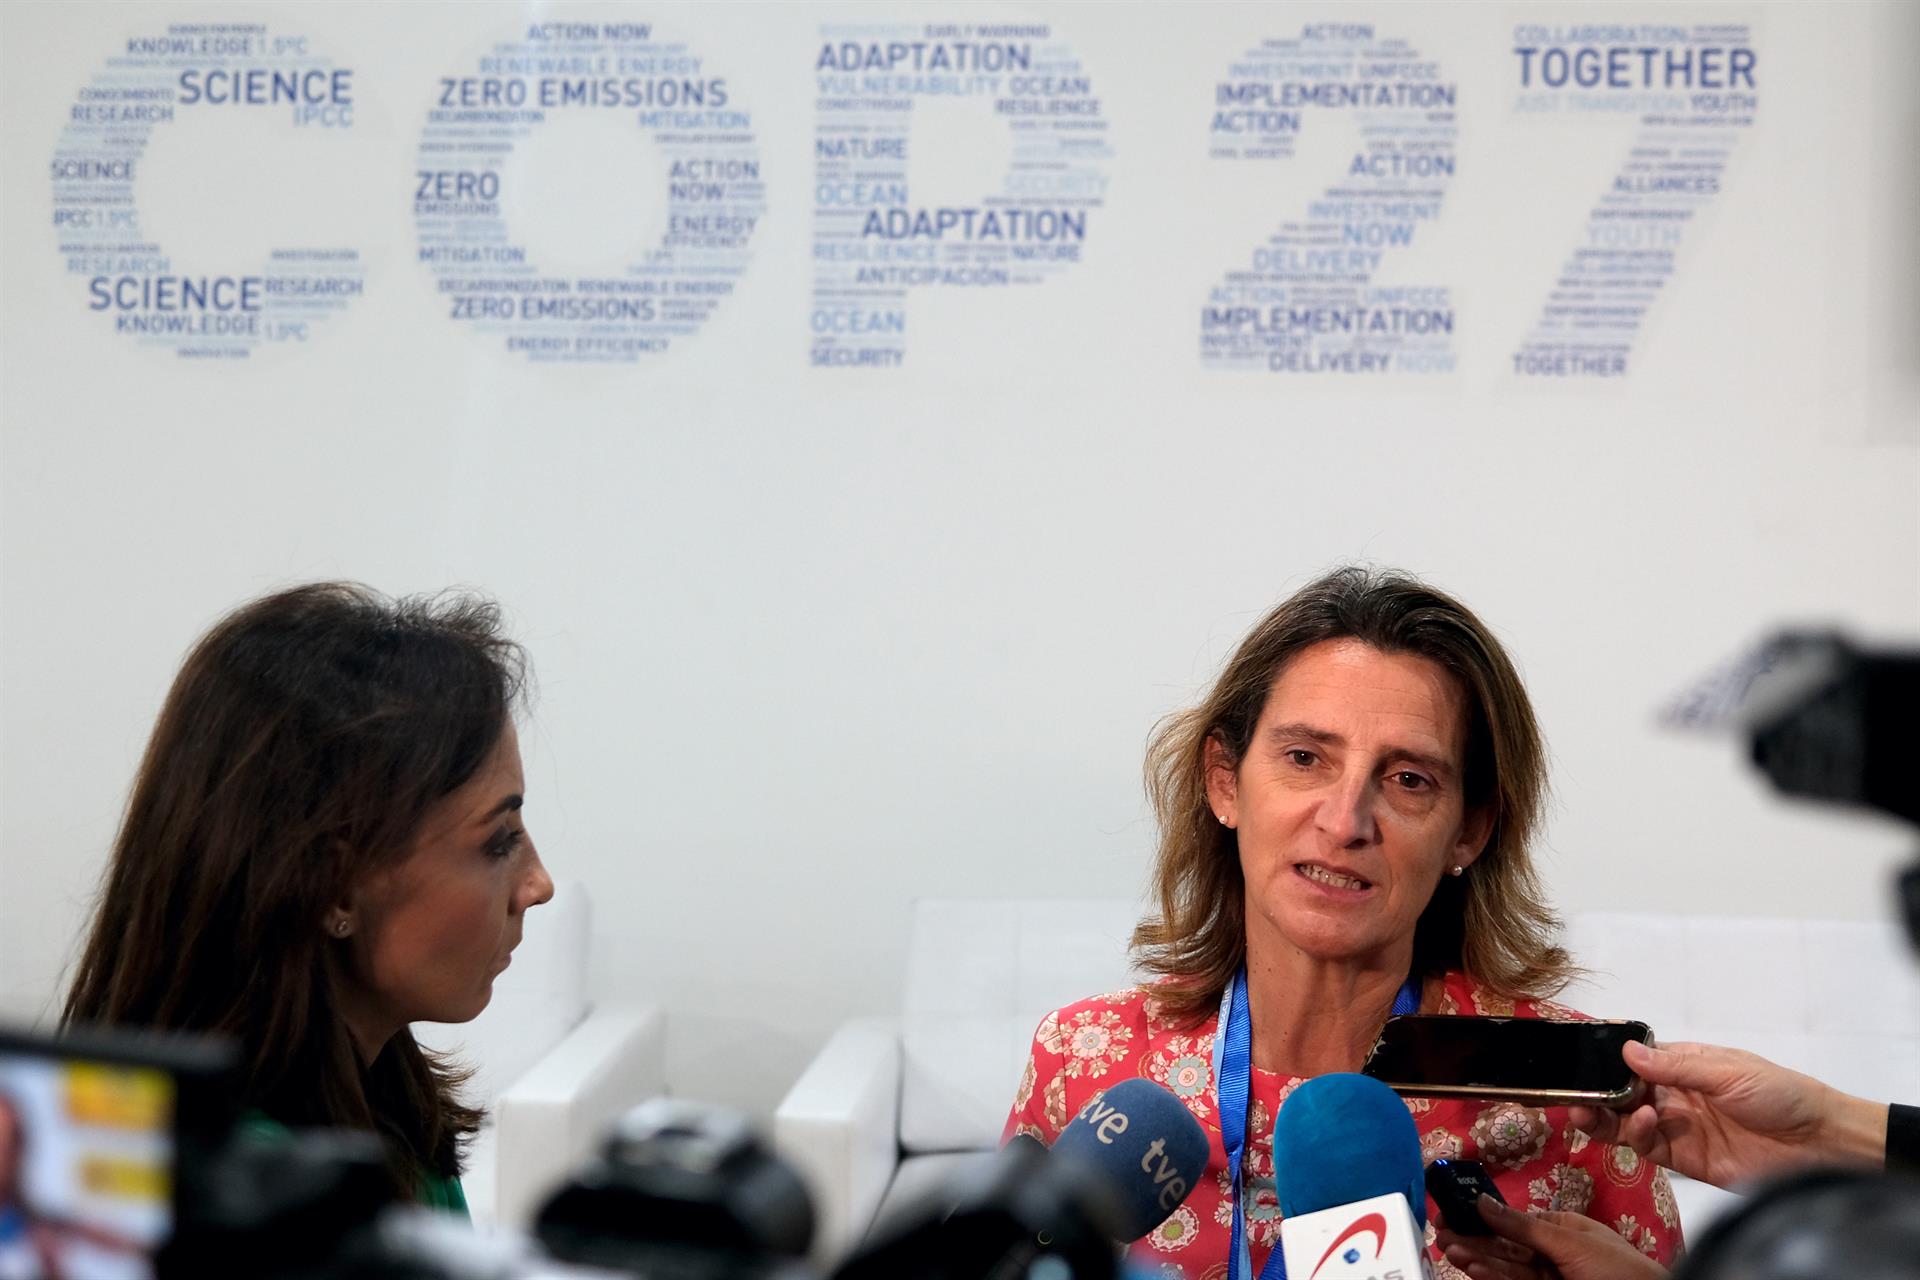 Sharm El Sheikh (Egypt), 07/11/2022.- Spanish Environment and Energy Minister Teresa Ribera (R) speaks to the media during the 2022 United Nations Climate Change Conference (COP27), in Sharm El-Sheikh, Egypt, 07 November 2022. The 2022 United Nations Climate Change Conference (COP27), running from 06 to 18 November in Sharm El-Sheikh, is expected to host one of the largest number of participants in the annual global climate conference of over 40,000 estimated attendees, including heads of states and governments, civil society, media and other relevant stakeholders. The events will include Climate Implementation Summit, thematic days, flagship initiatives, and Green Zone activities engaging with climate and other global challenges. (Egipto) EFE/EPA/SEDAT SUNA